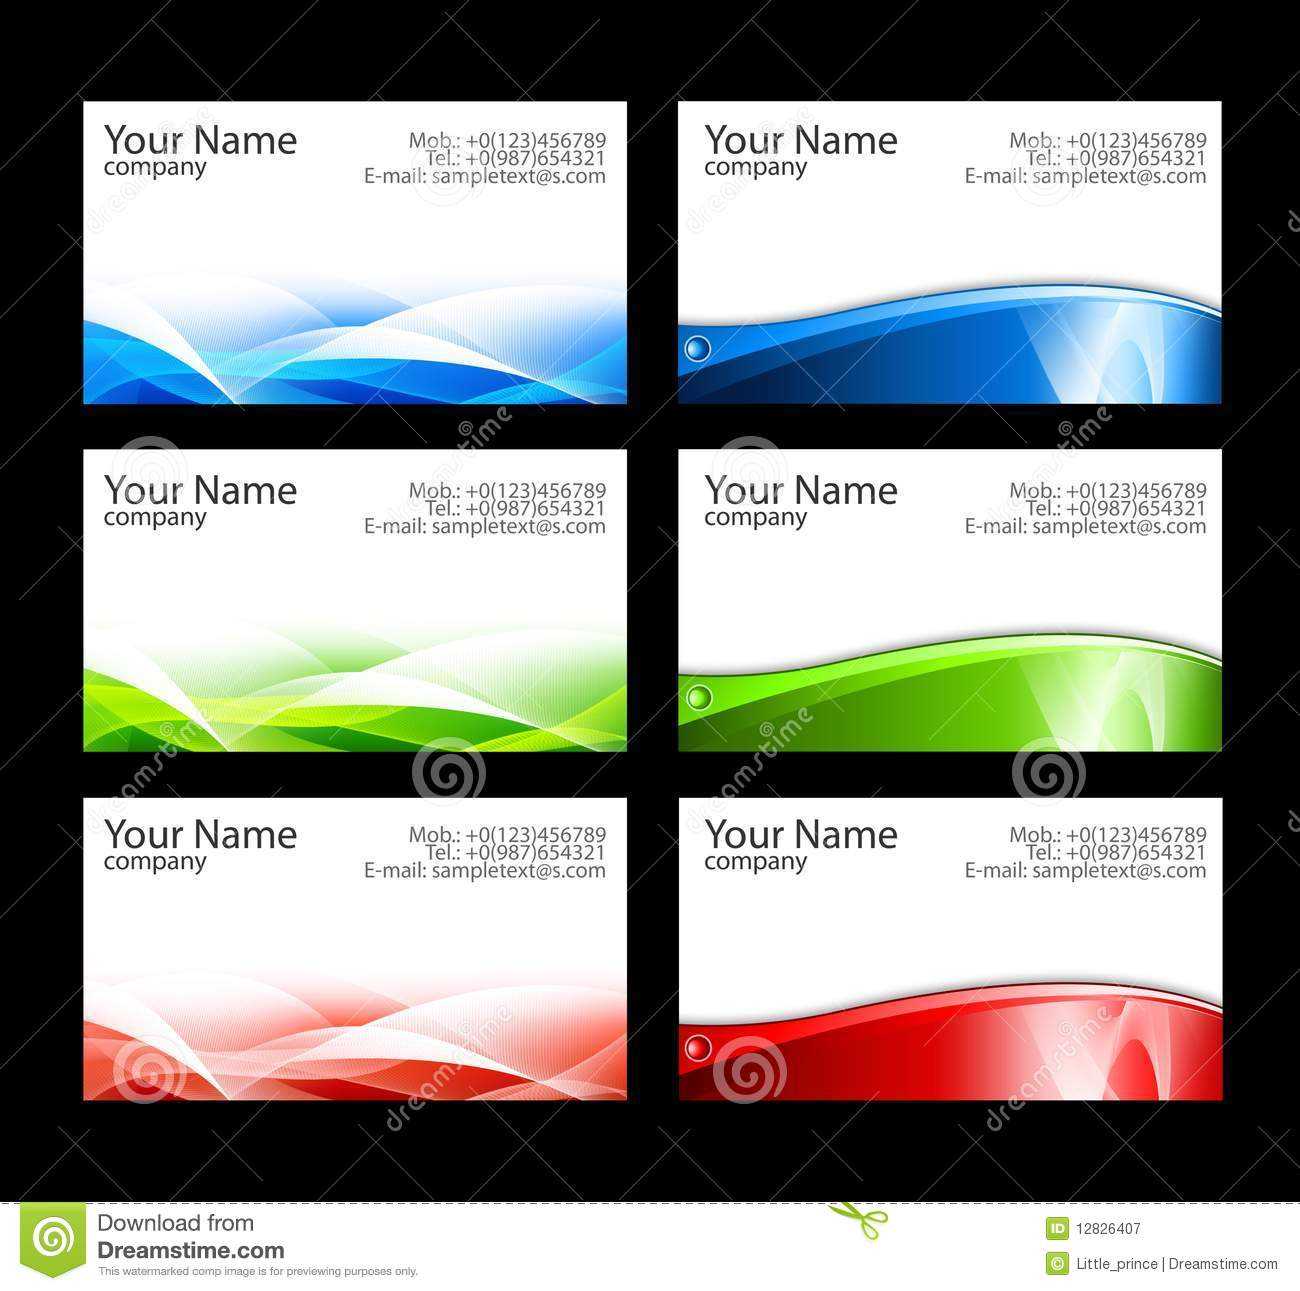 Free Calling Card Template Download Tunu redmini co For Template For Calling Card Great 